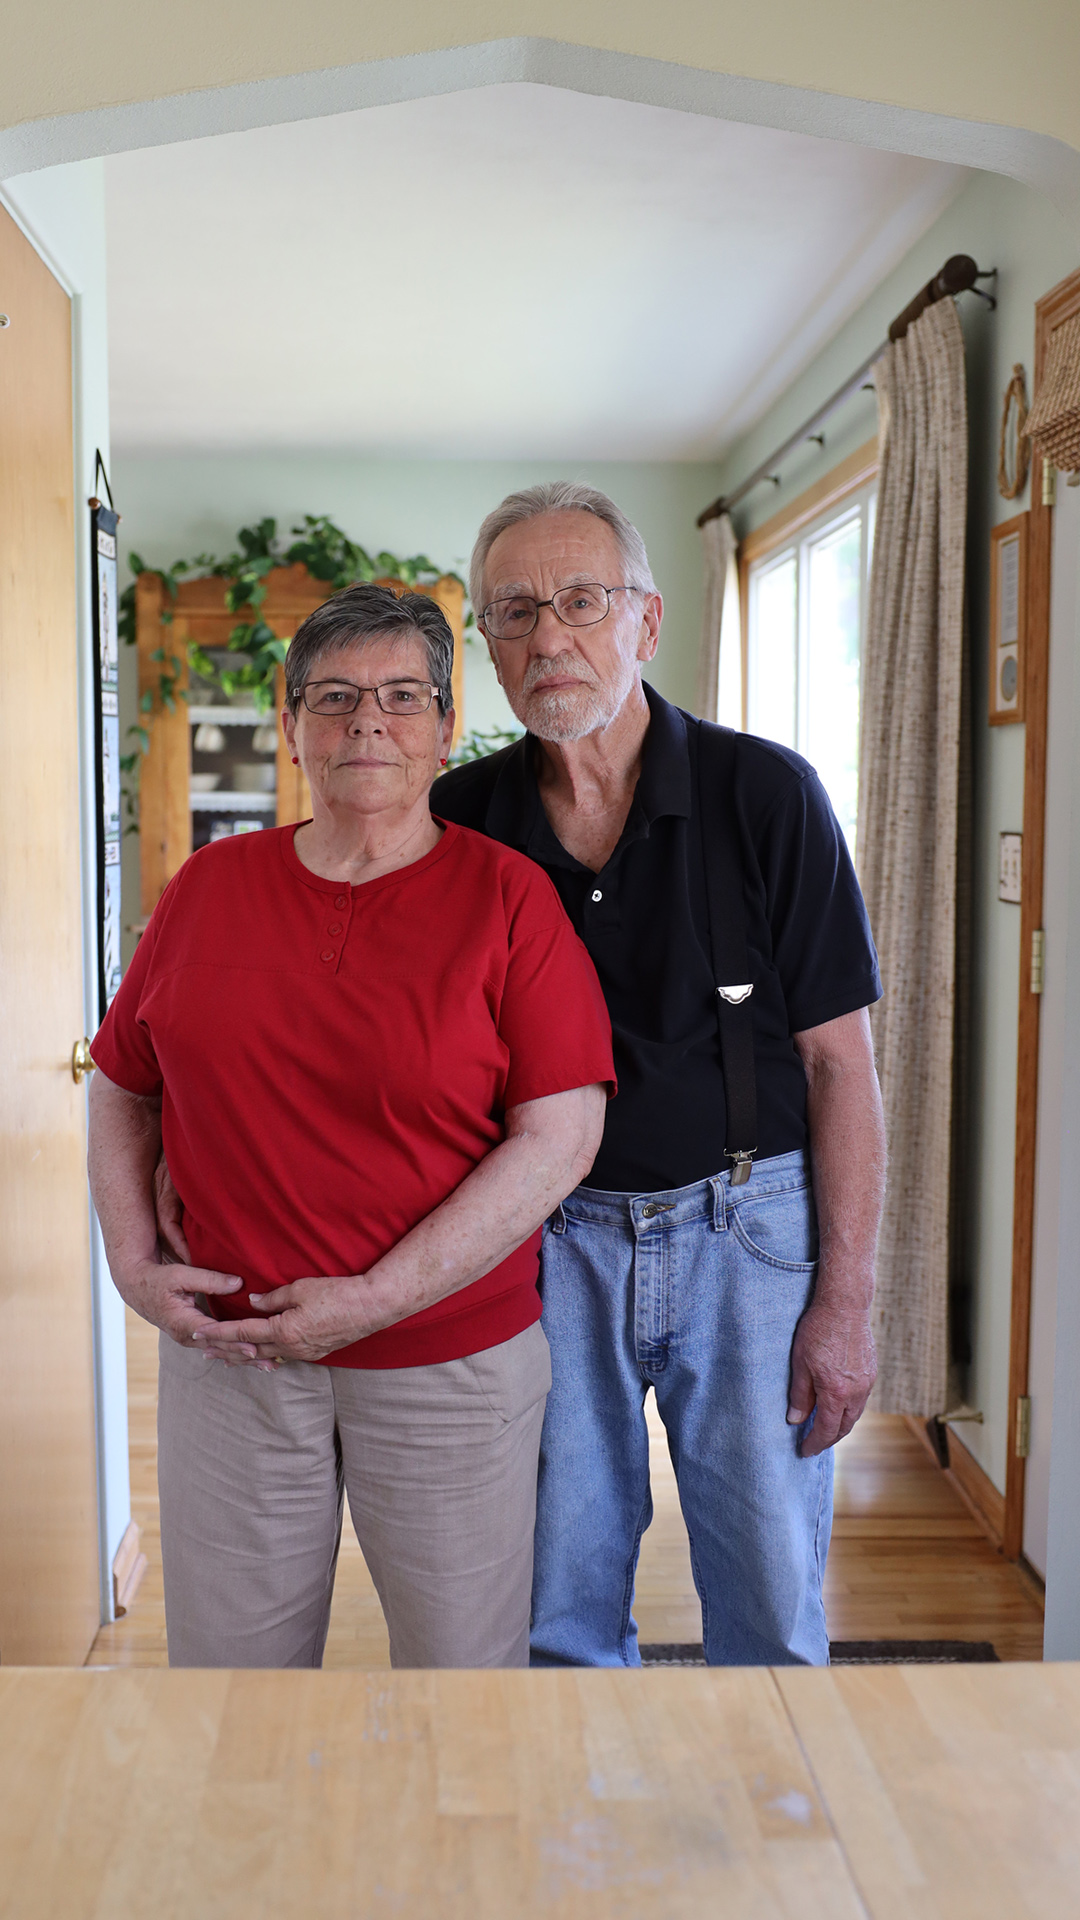 Jim Boisen and Margie Walker pose for a portrait inside a room, with a window, door and cabinet in the background.